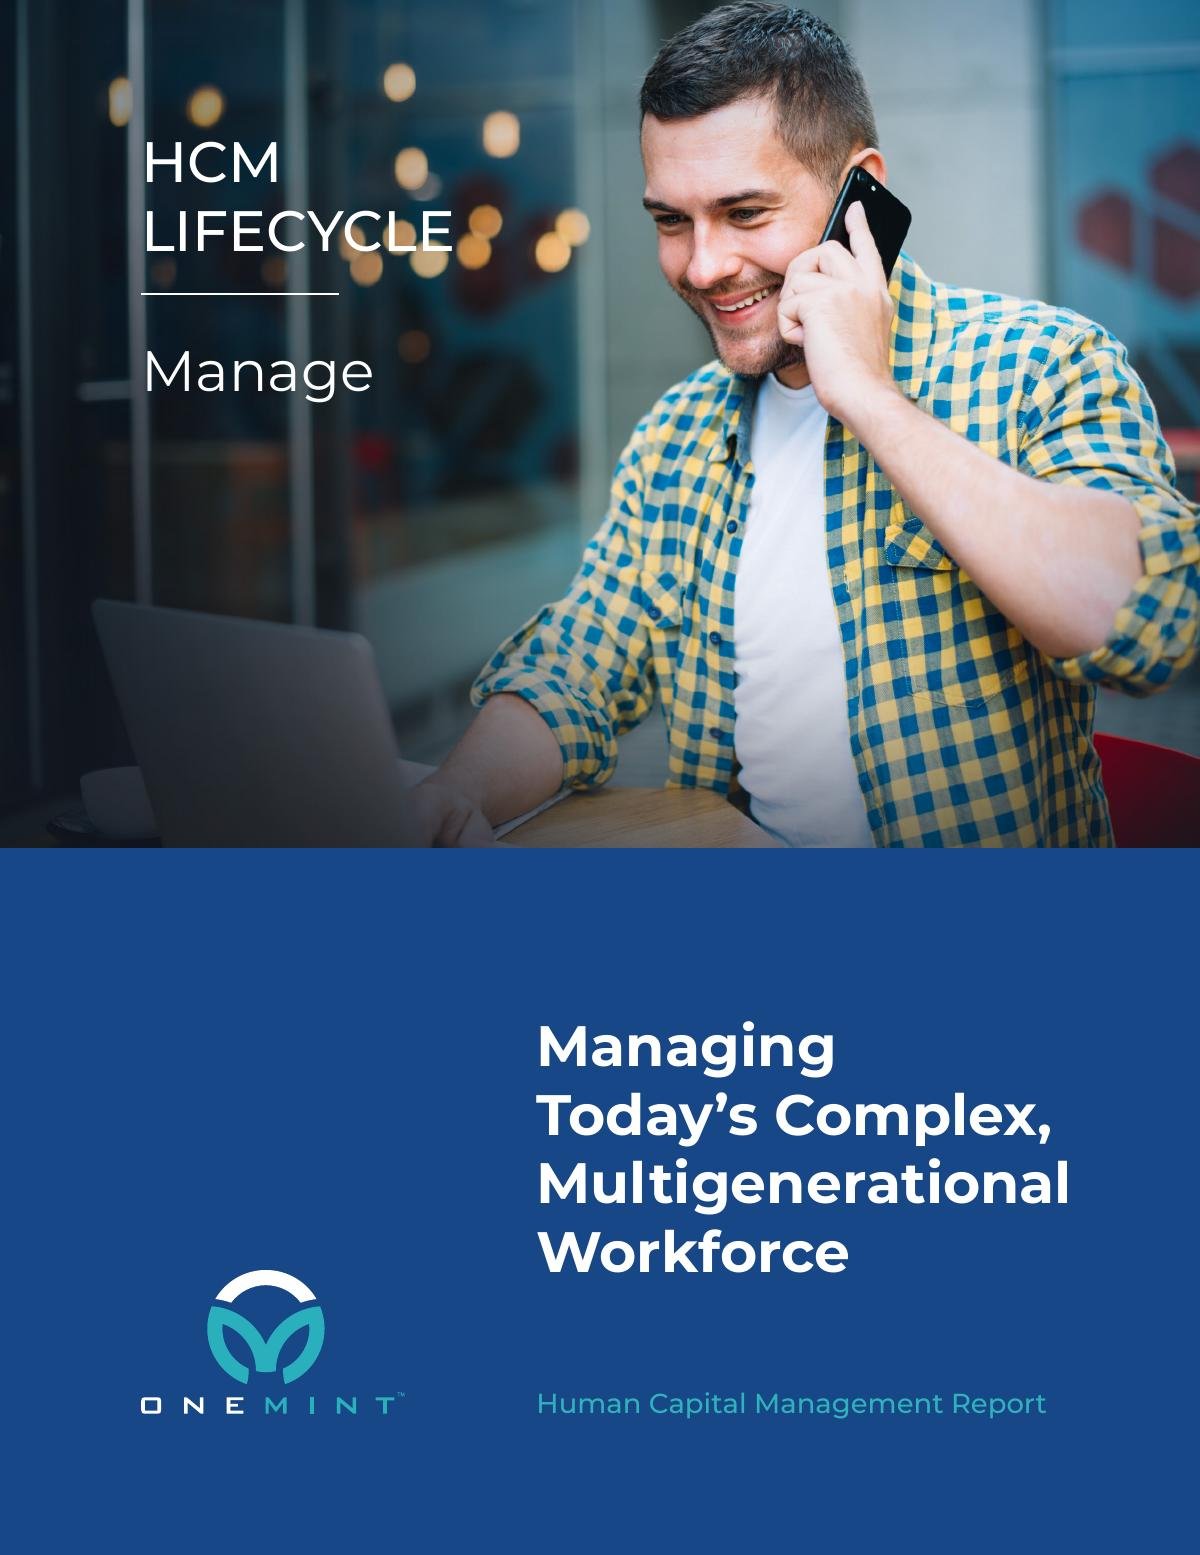 HCM Lifecycle Part 3 - Managing Today's Complex, Multi-Generational Workforce